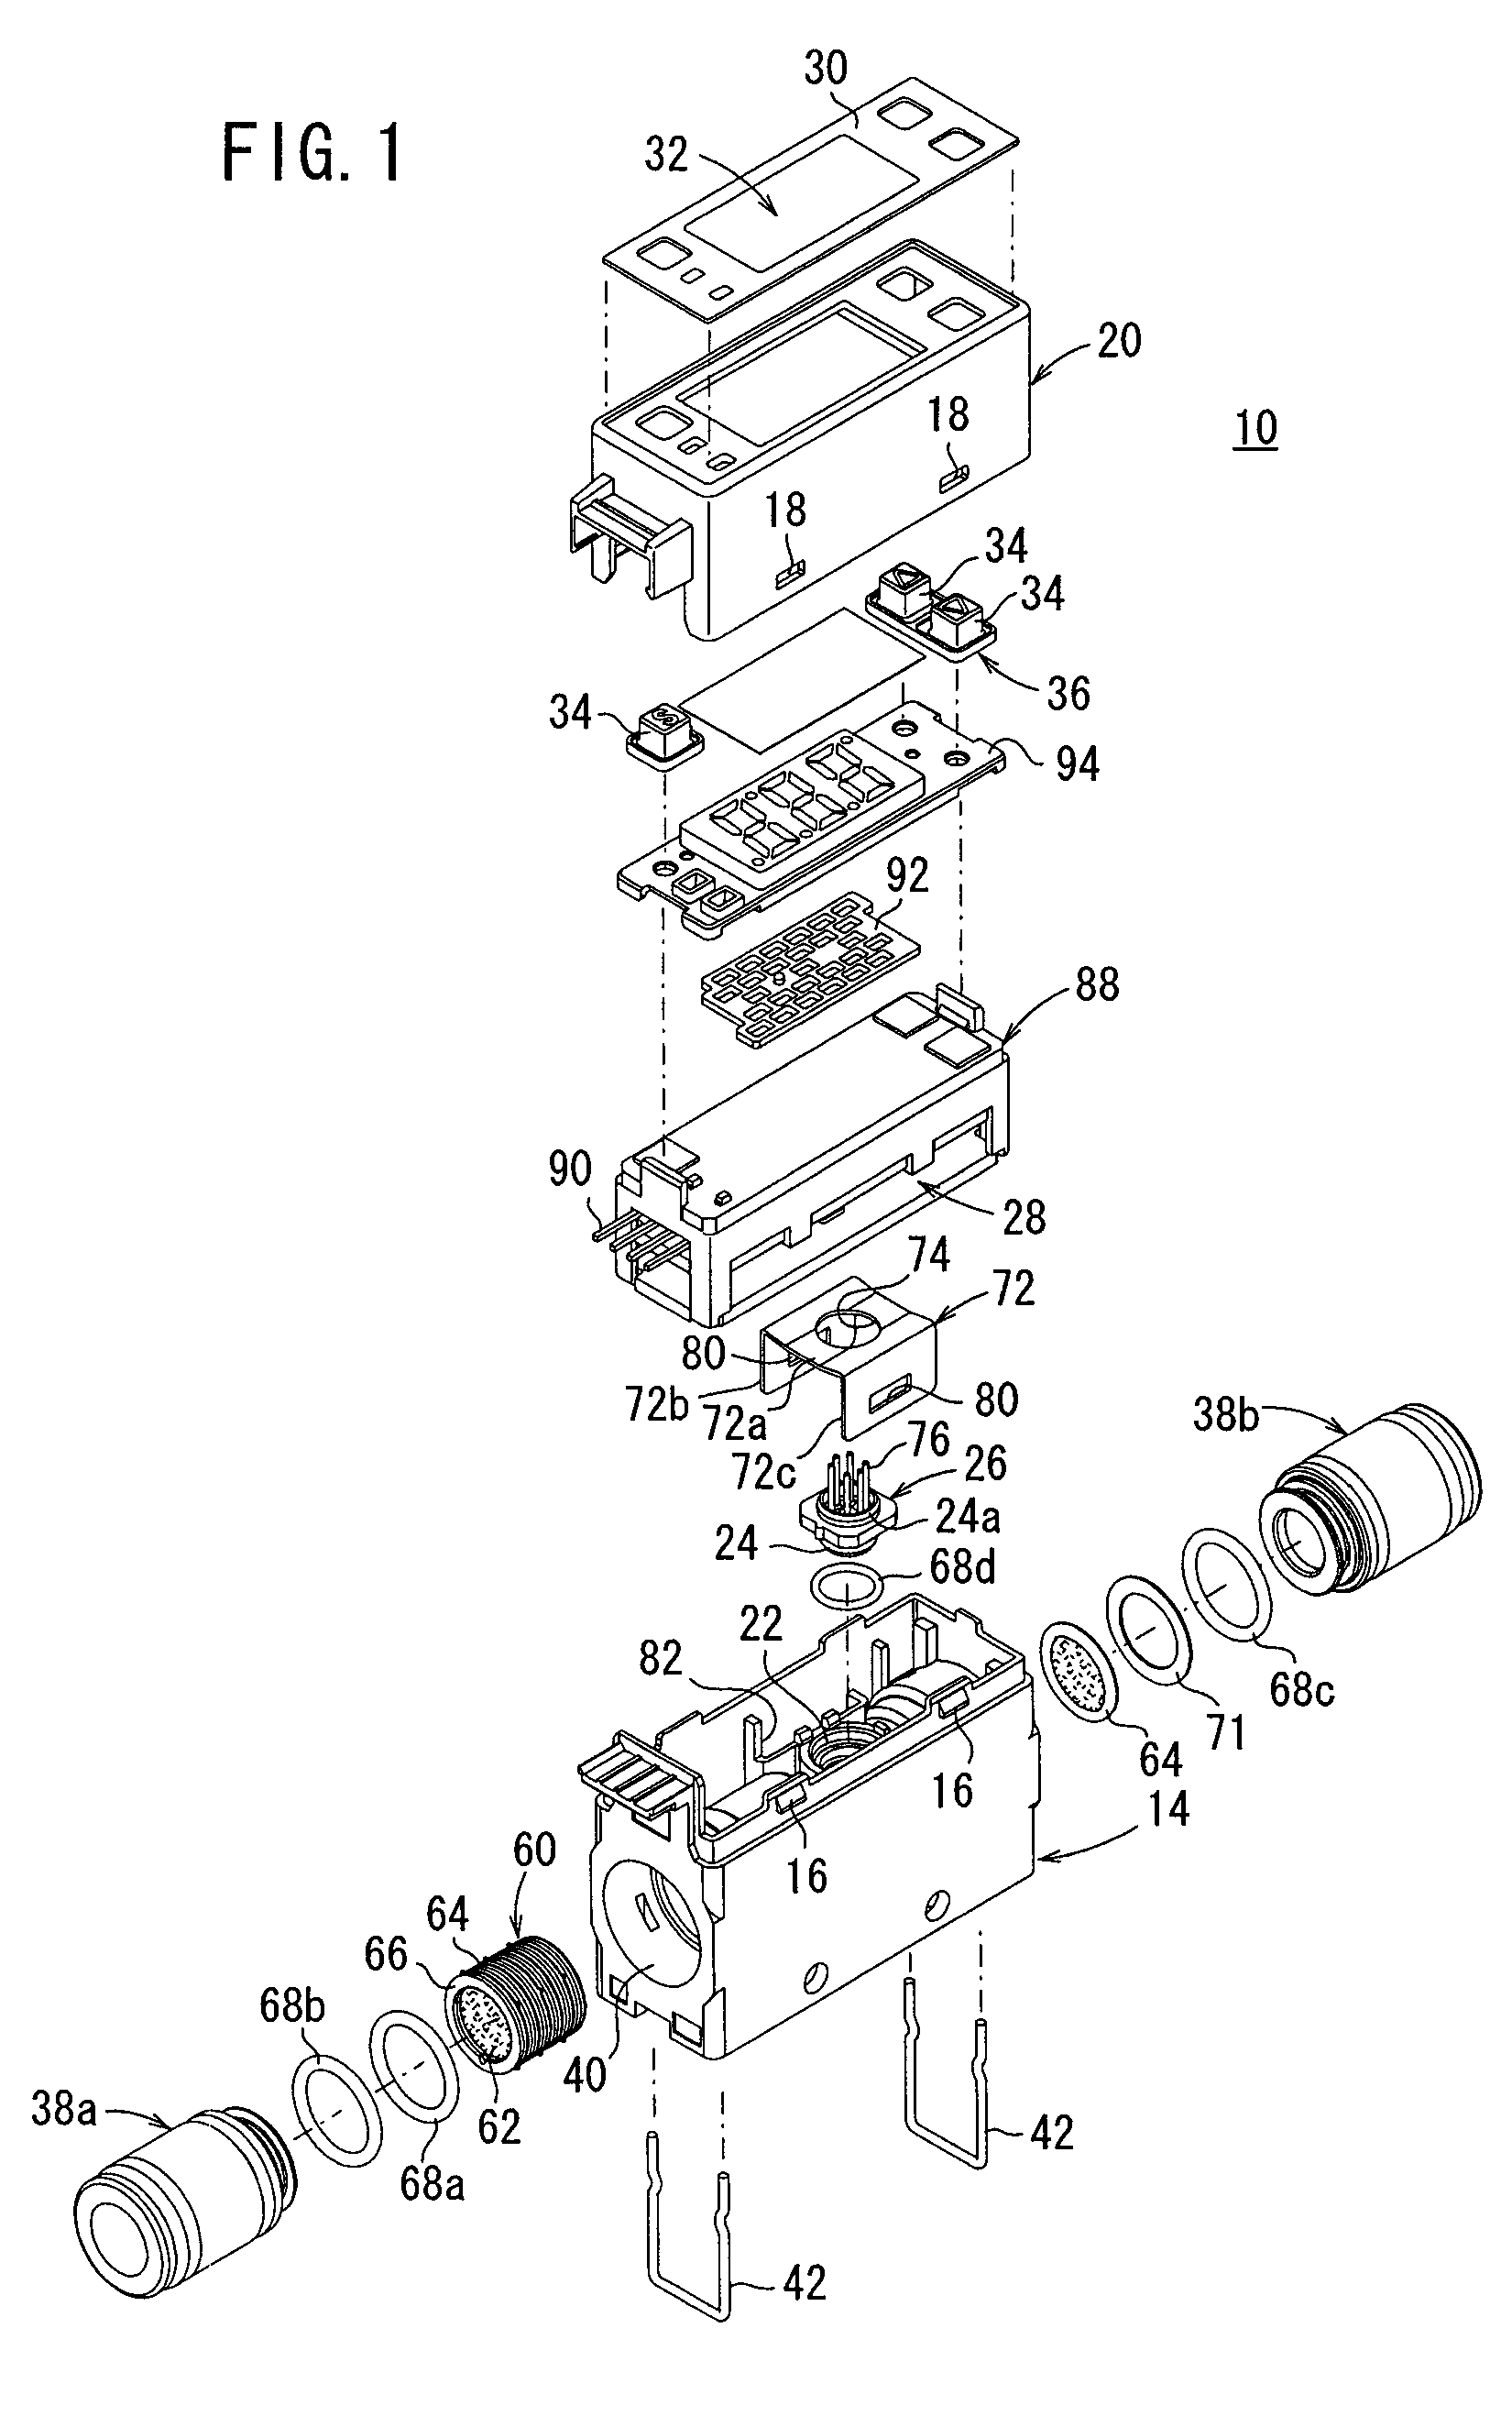 Flow meter with a rectifying module having a plurality of mesh members